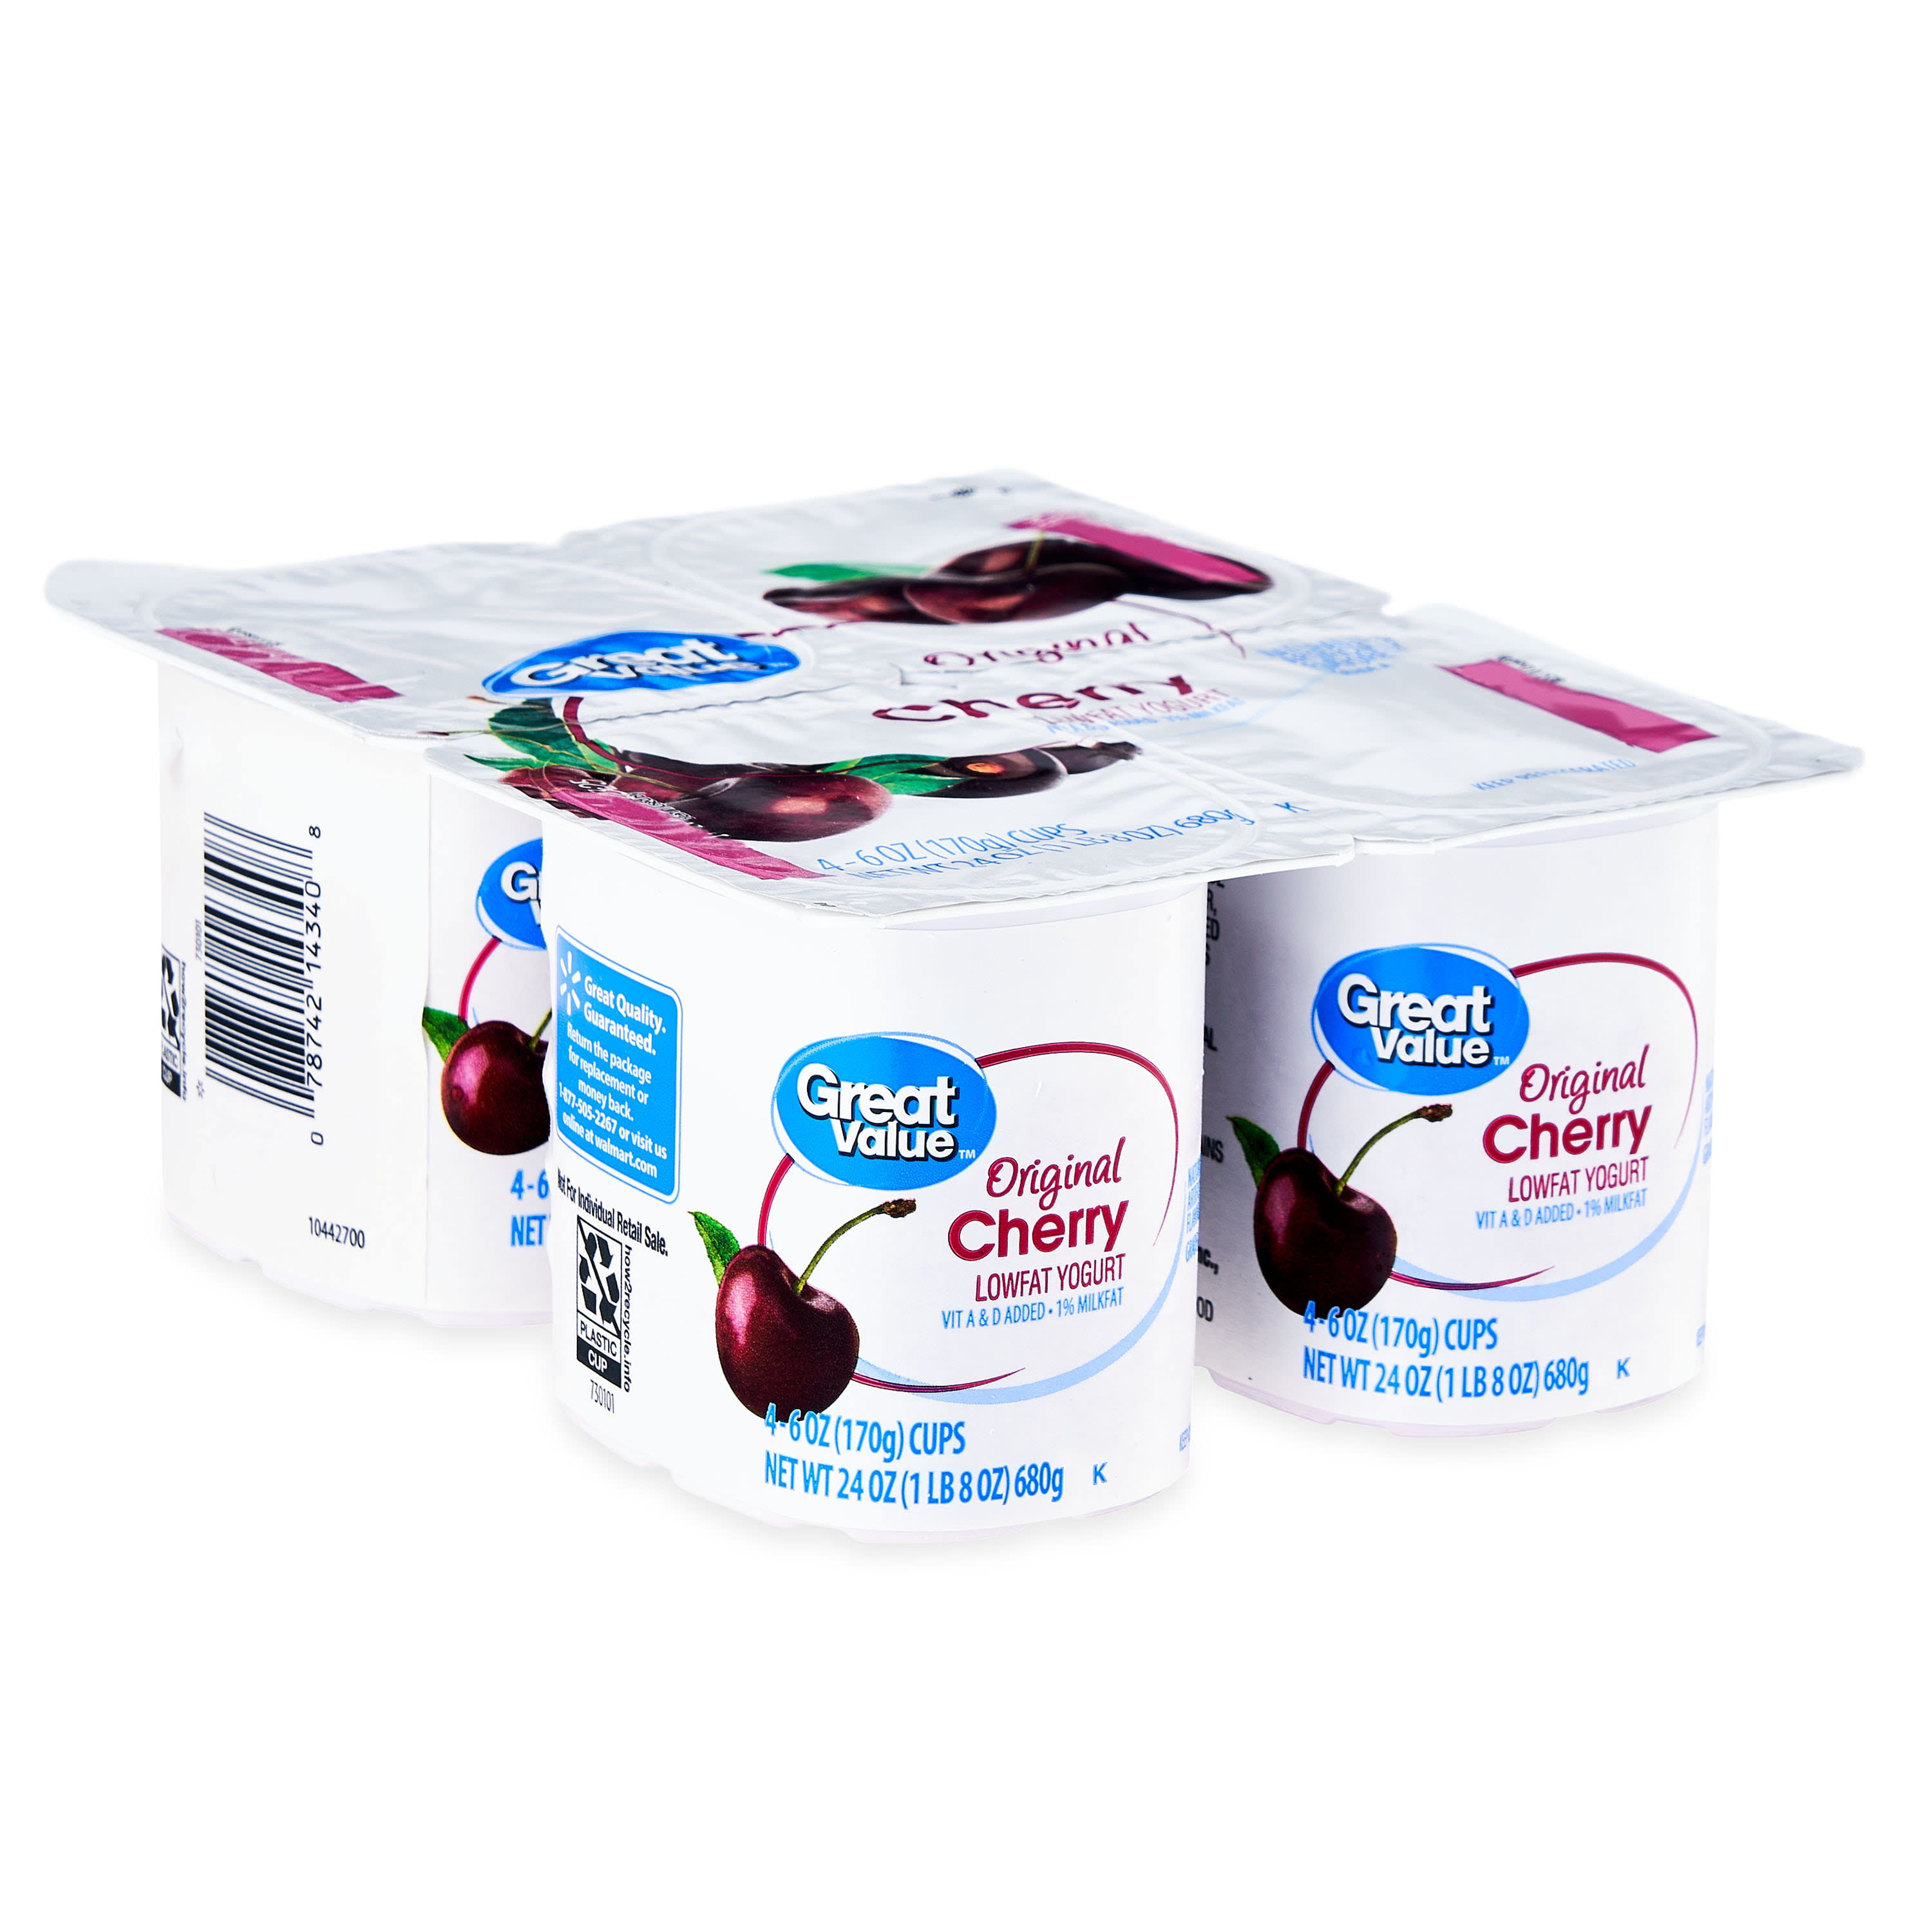 Activia Probiotic Low Fat Yogurt Variety Pack 4 Oz Pack Of 24 Cups